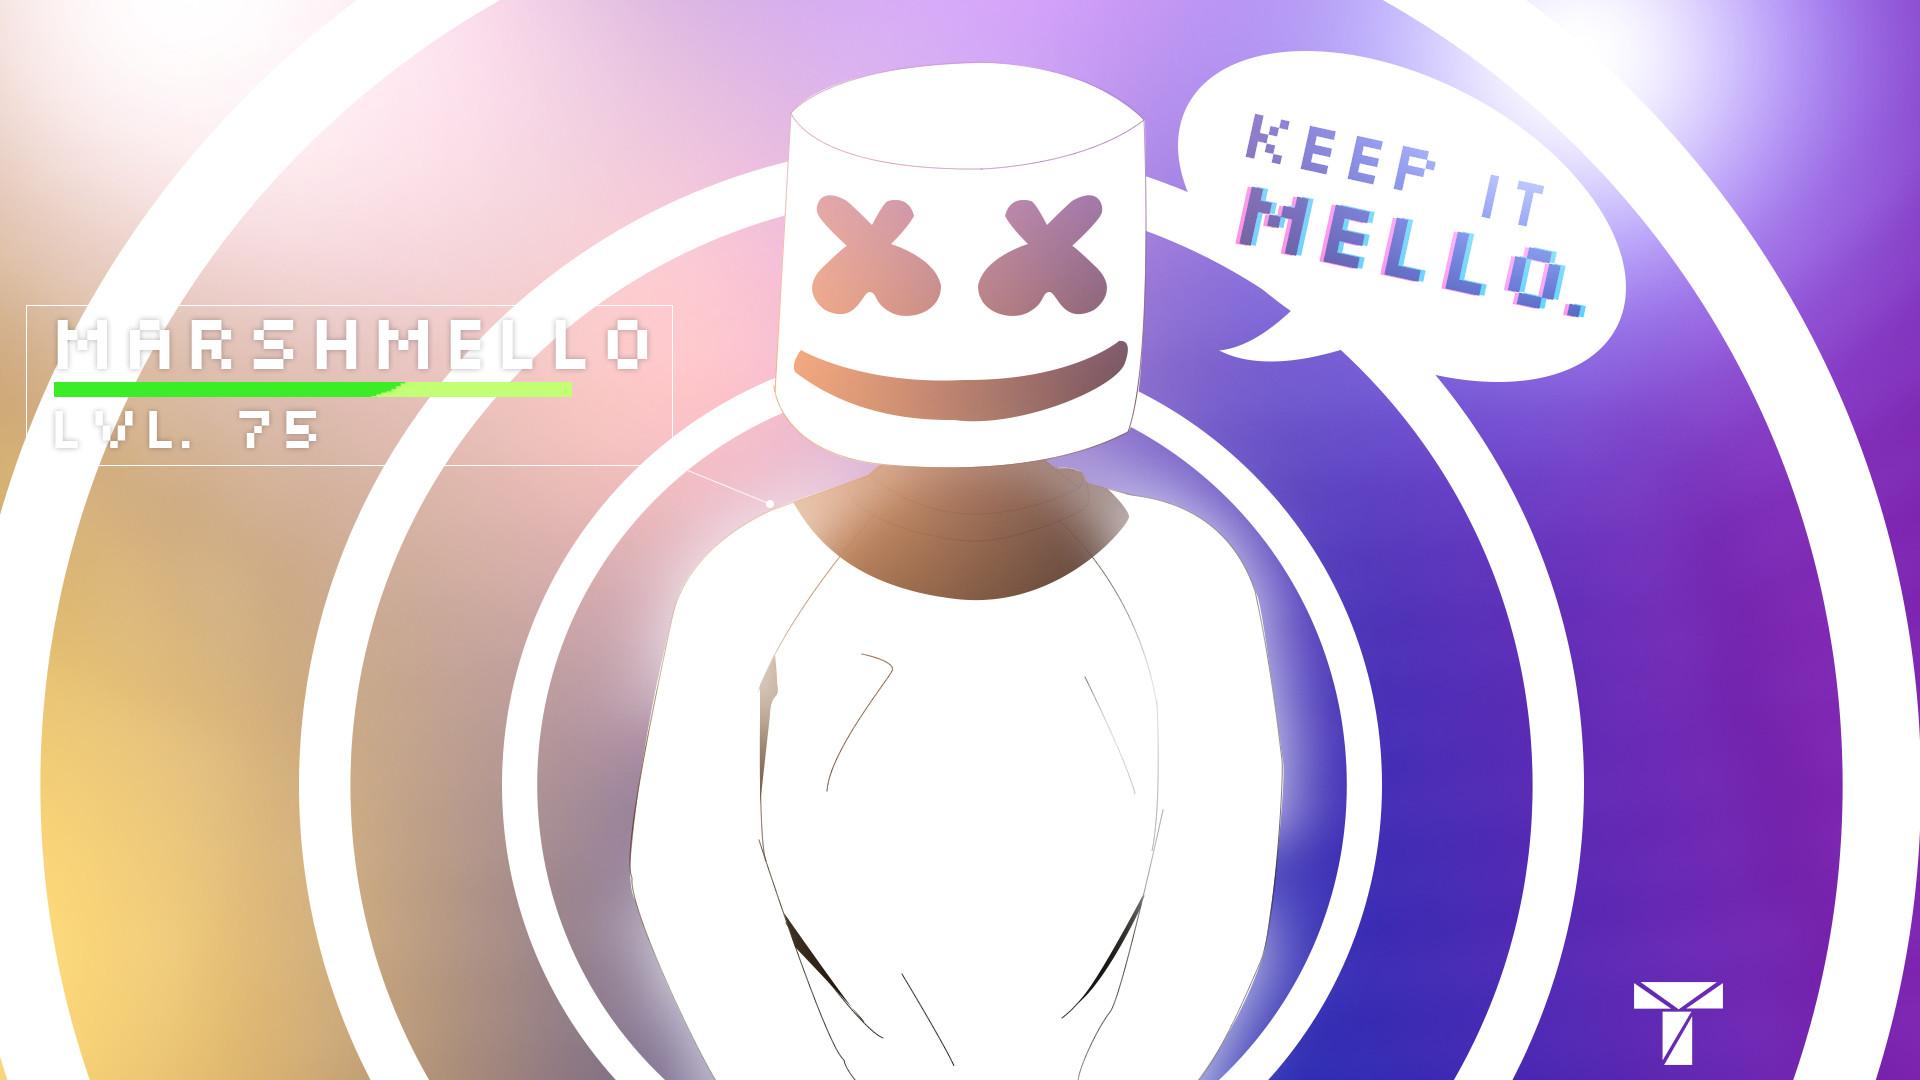 Keep It Mello, King Theophilus